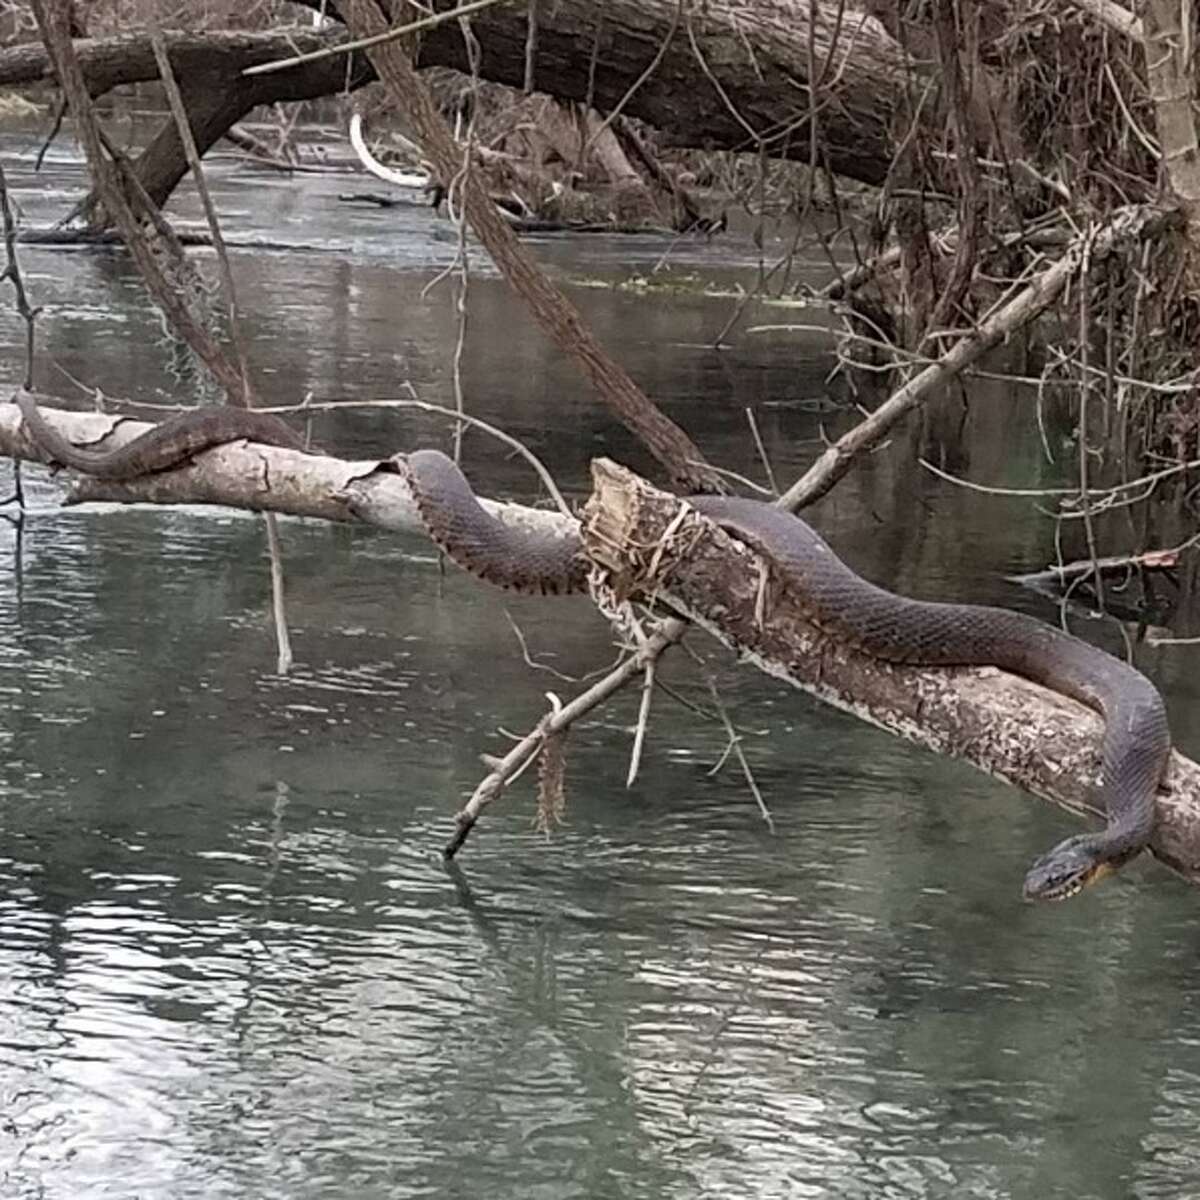 @texbubba: "Ran into this guy this evening while fishing. Almost leaned on him before I even realized!"